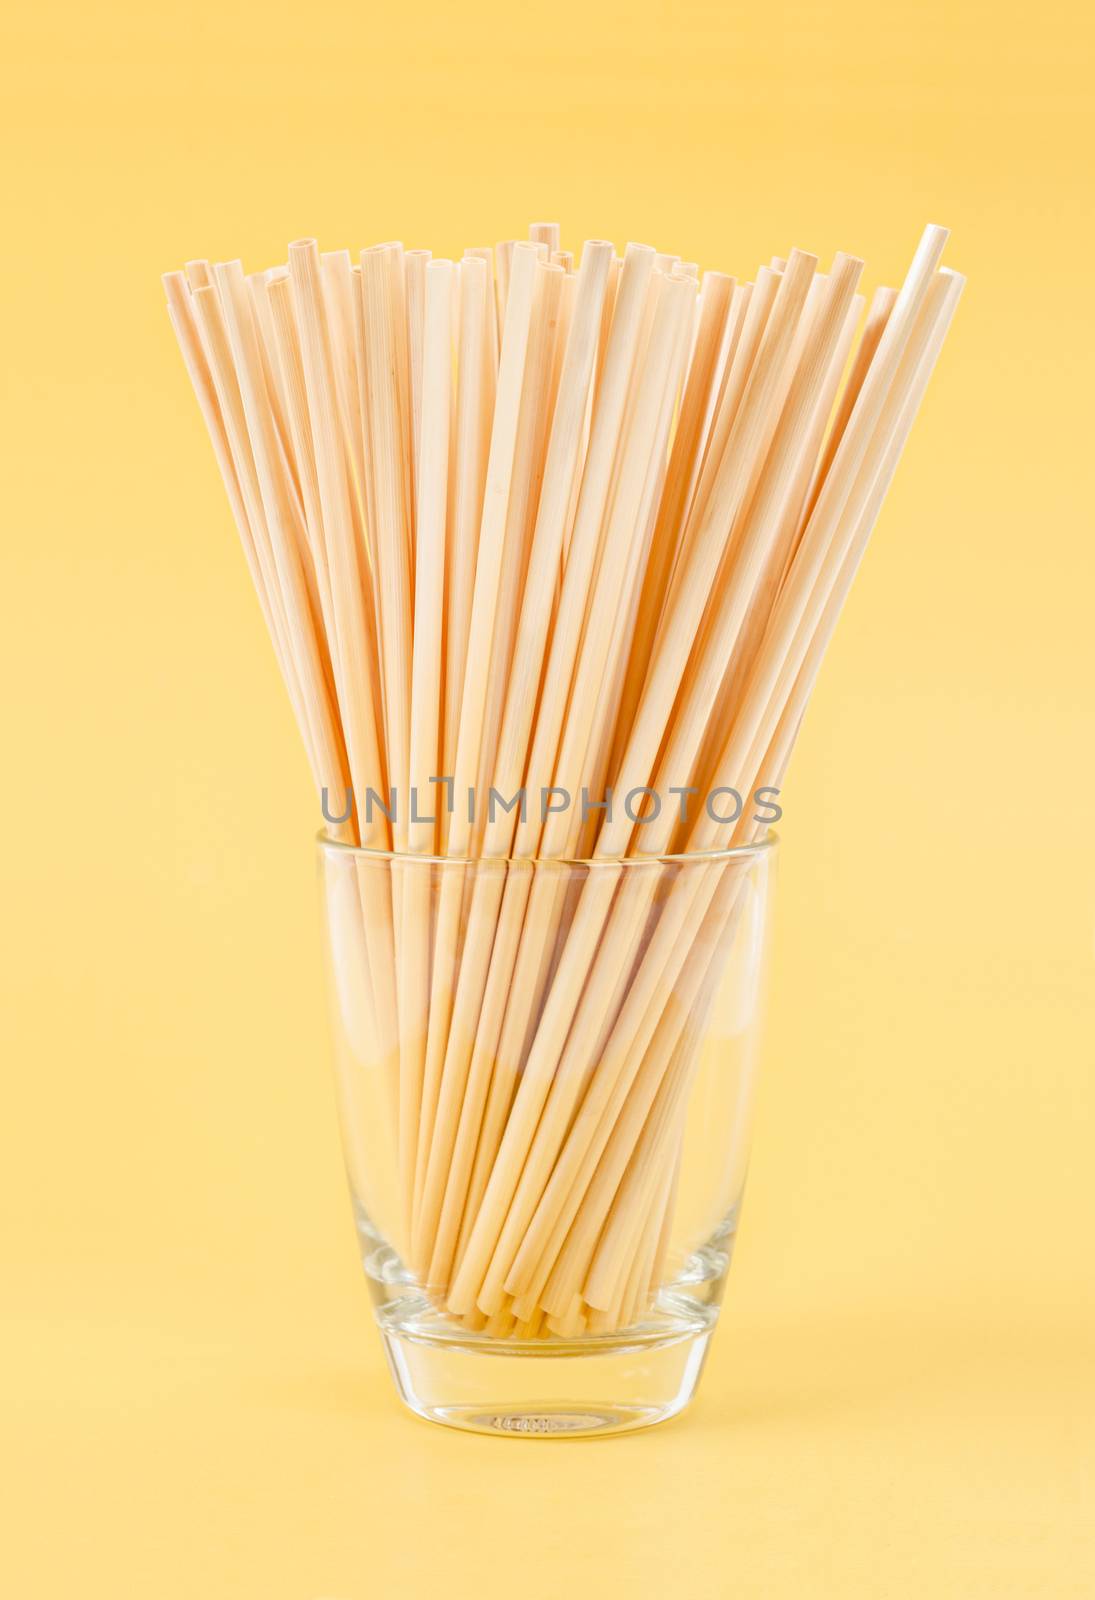 Wheat Straws for drinking water natural eco friendly renewable i by Gamjai